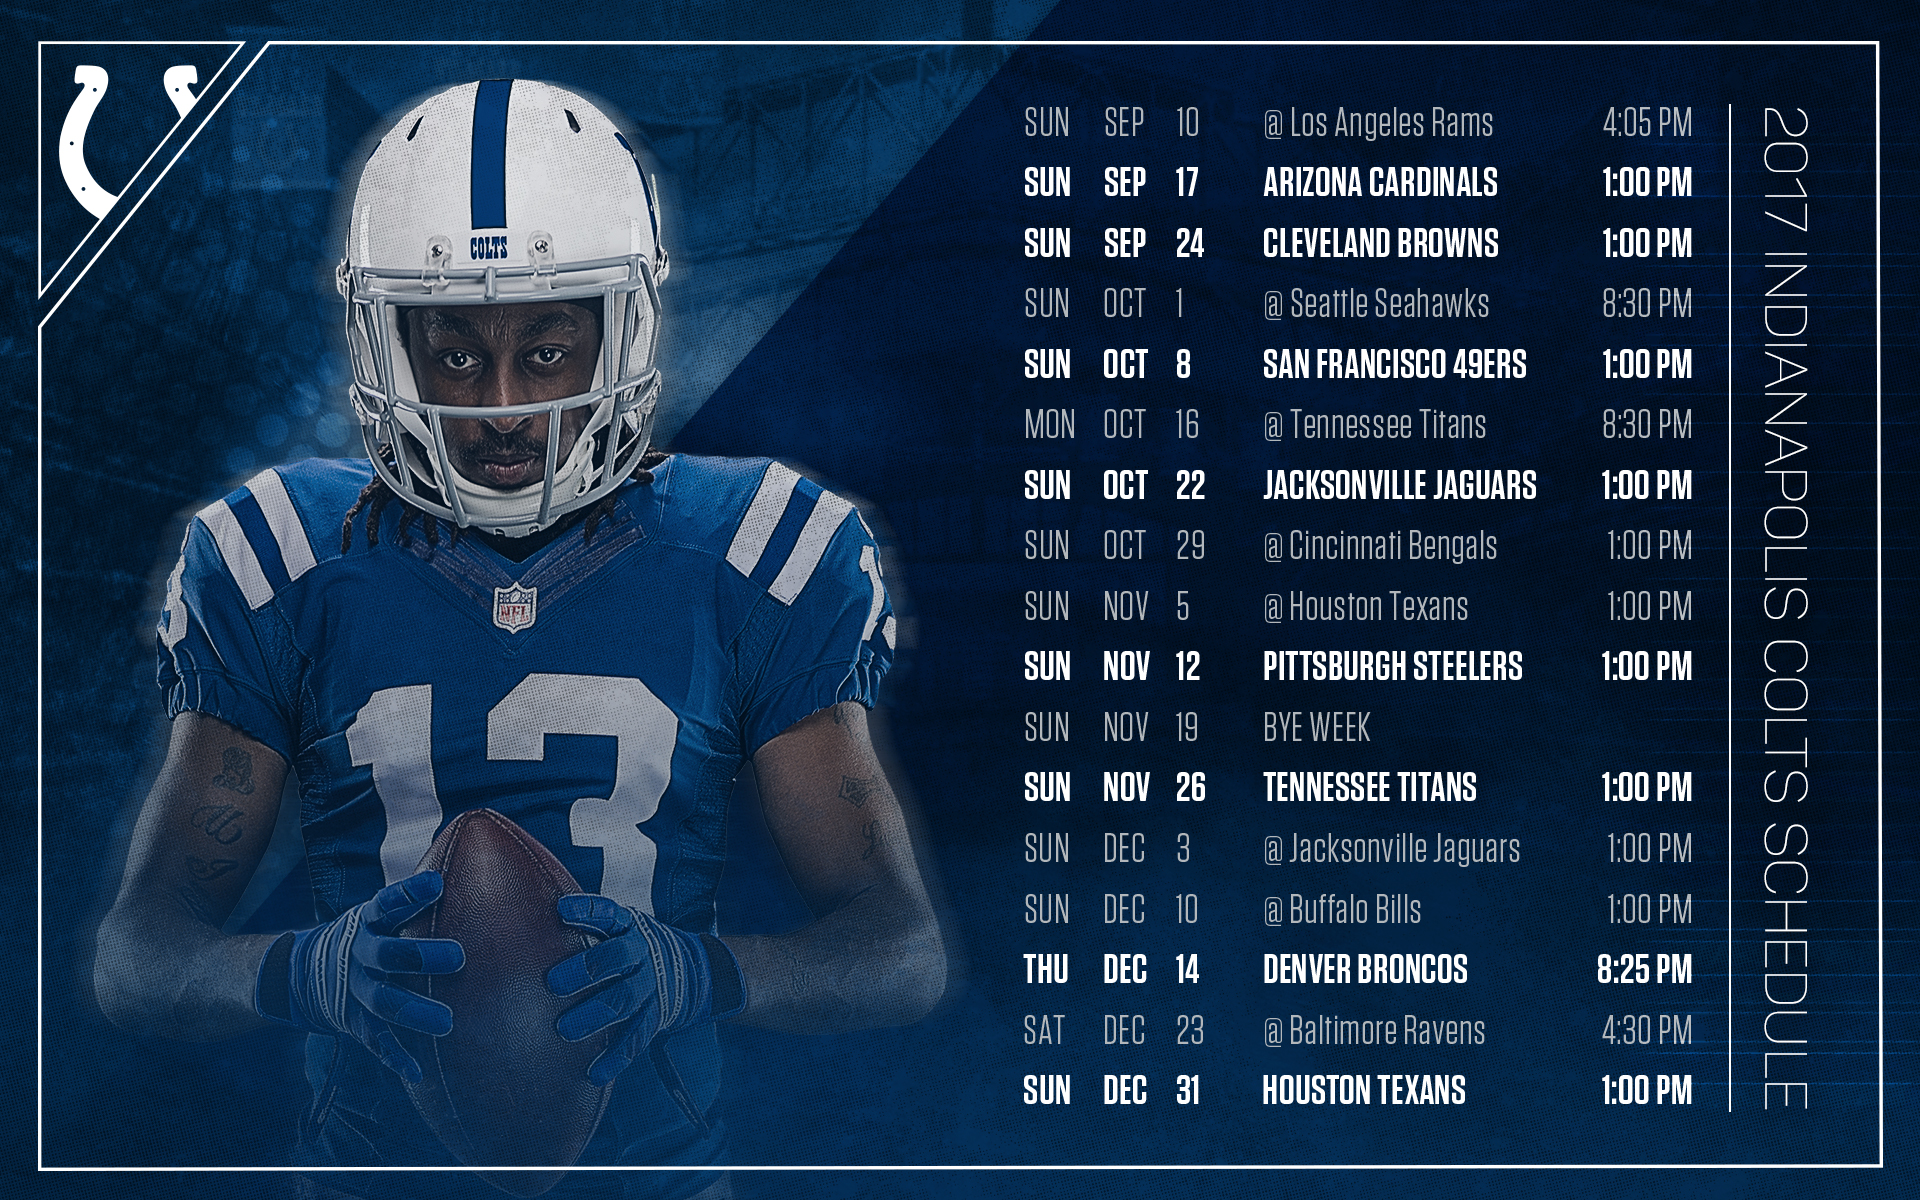 Free download Indianapolis Colts Wallpaper 16 1920 X 1200 stmednet ...